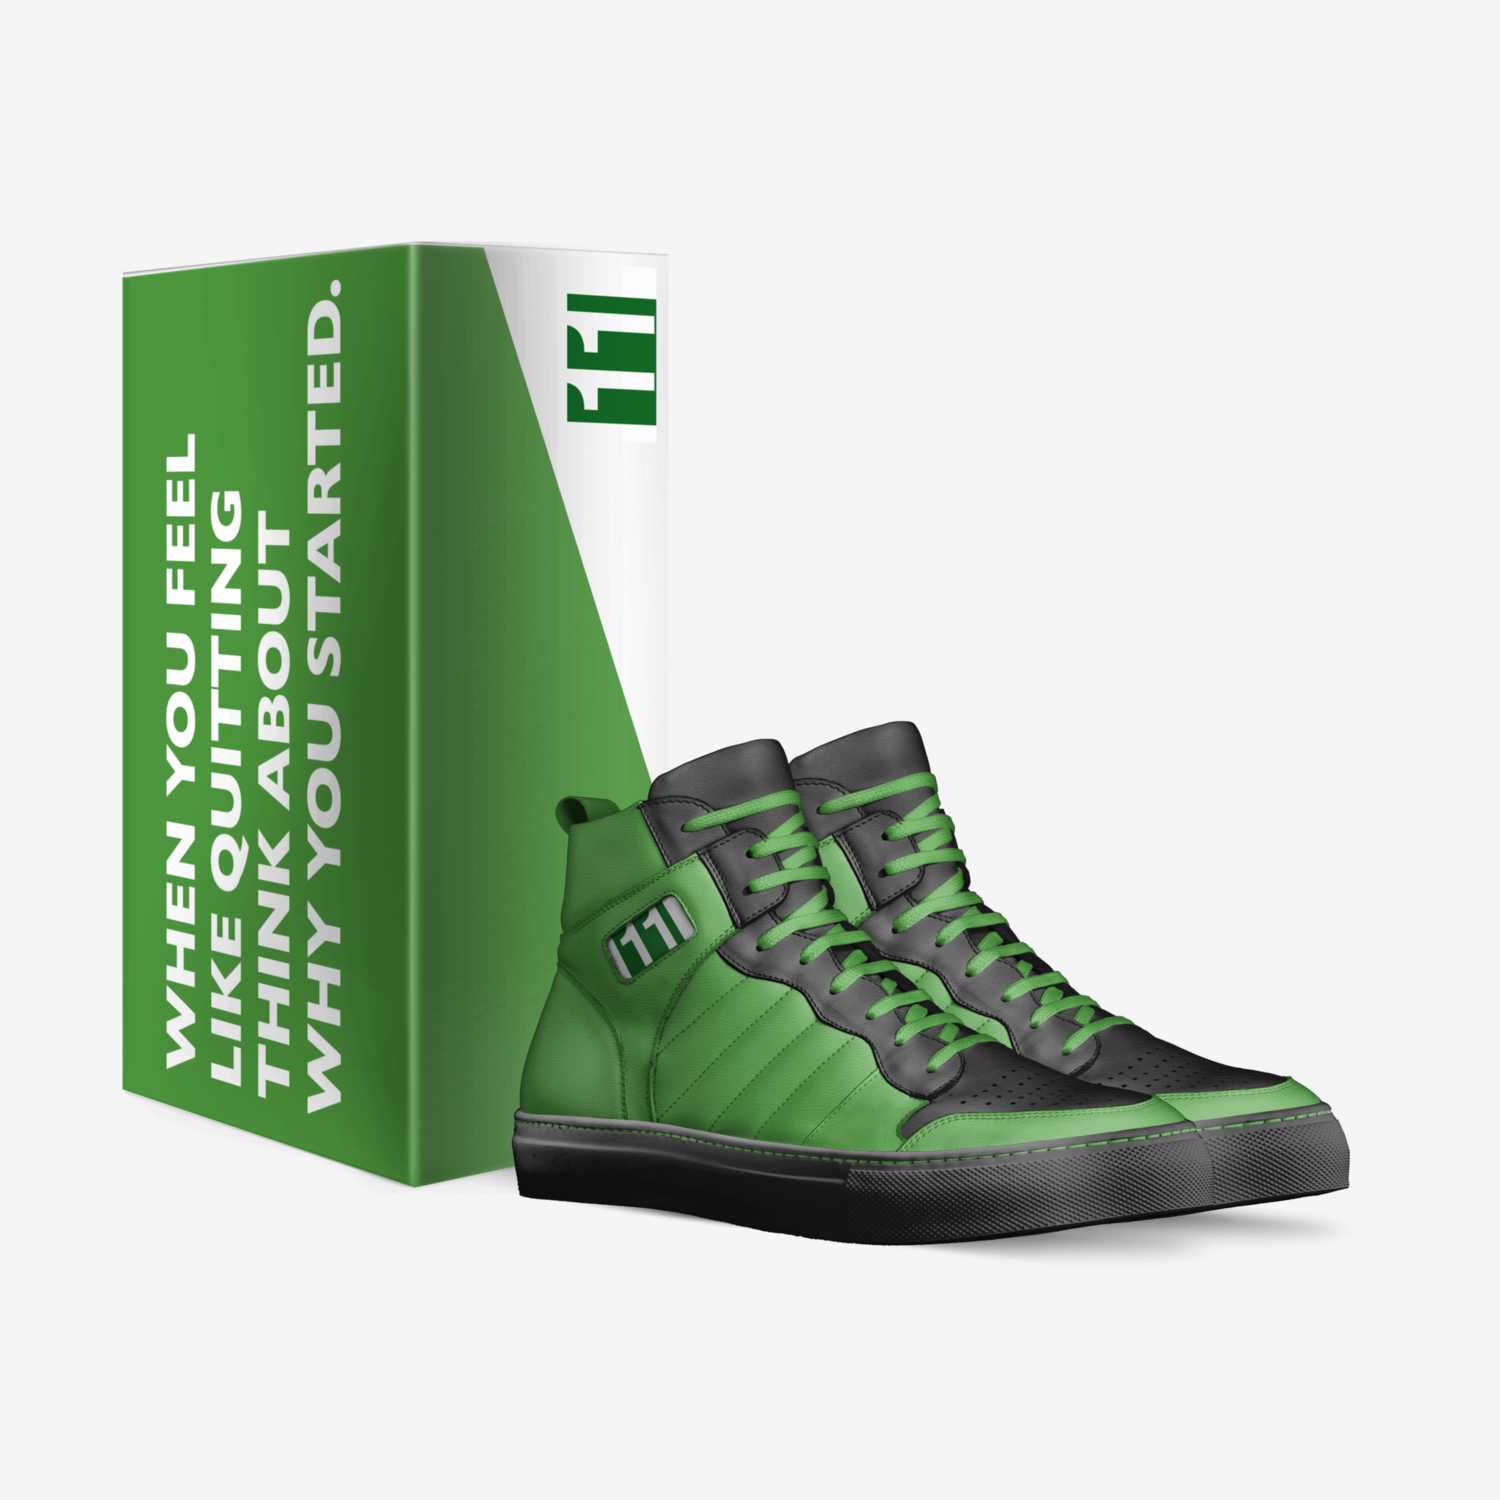 CELTICS custom made in Italy shoes by Jerry Johns | Box view